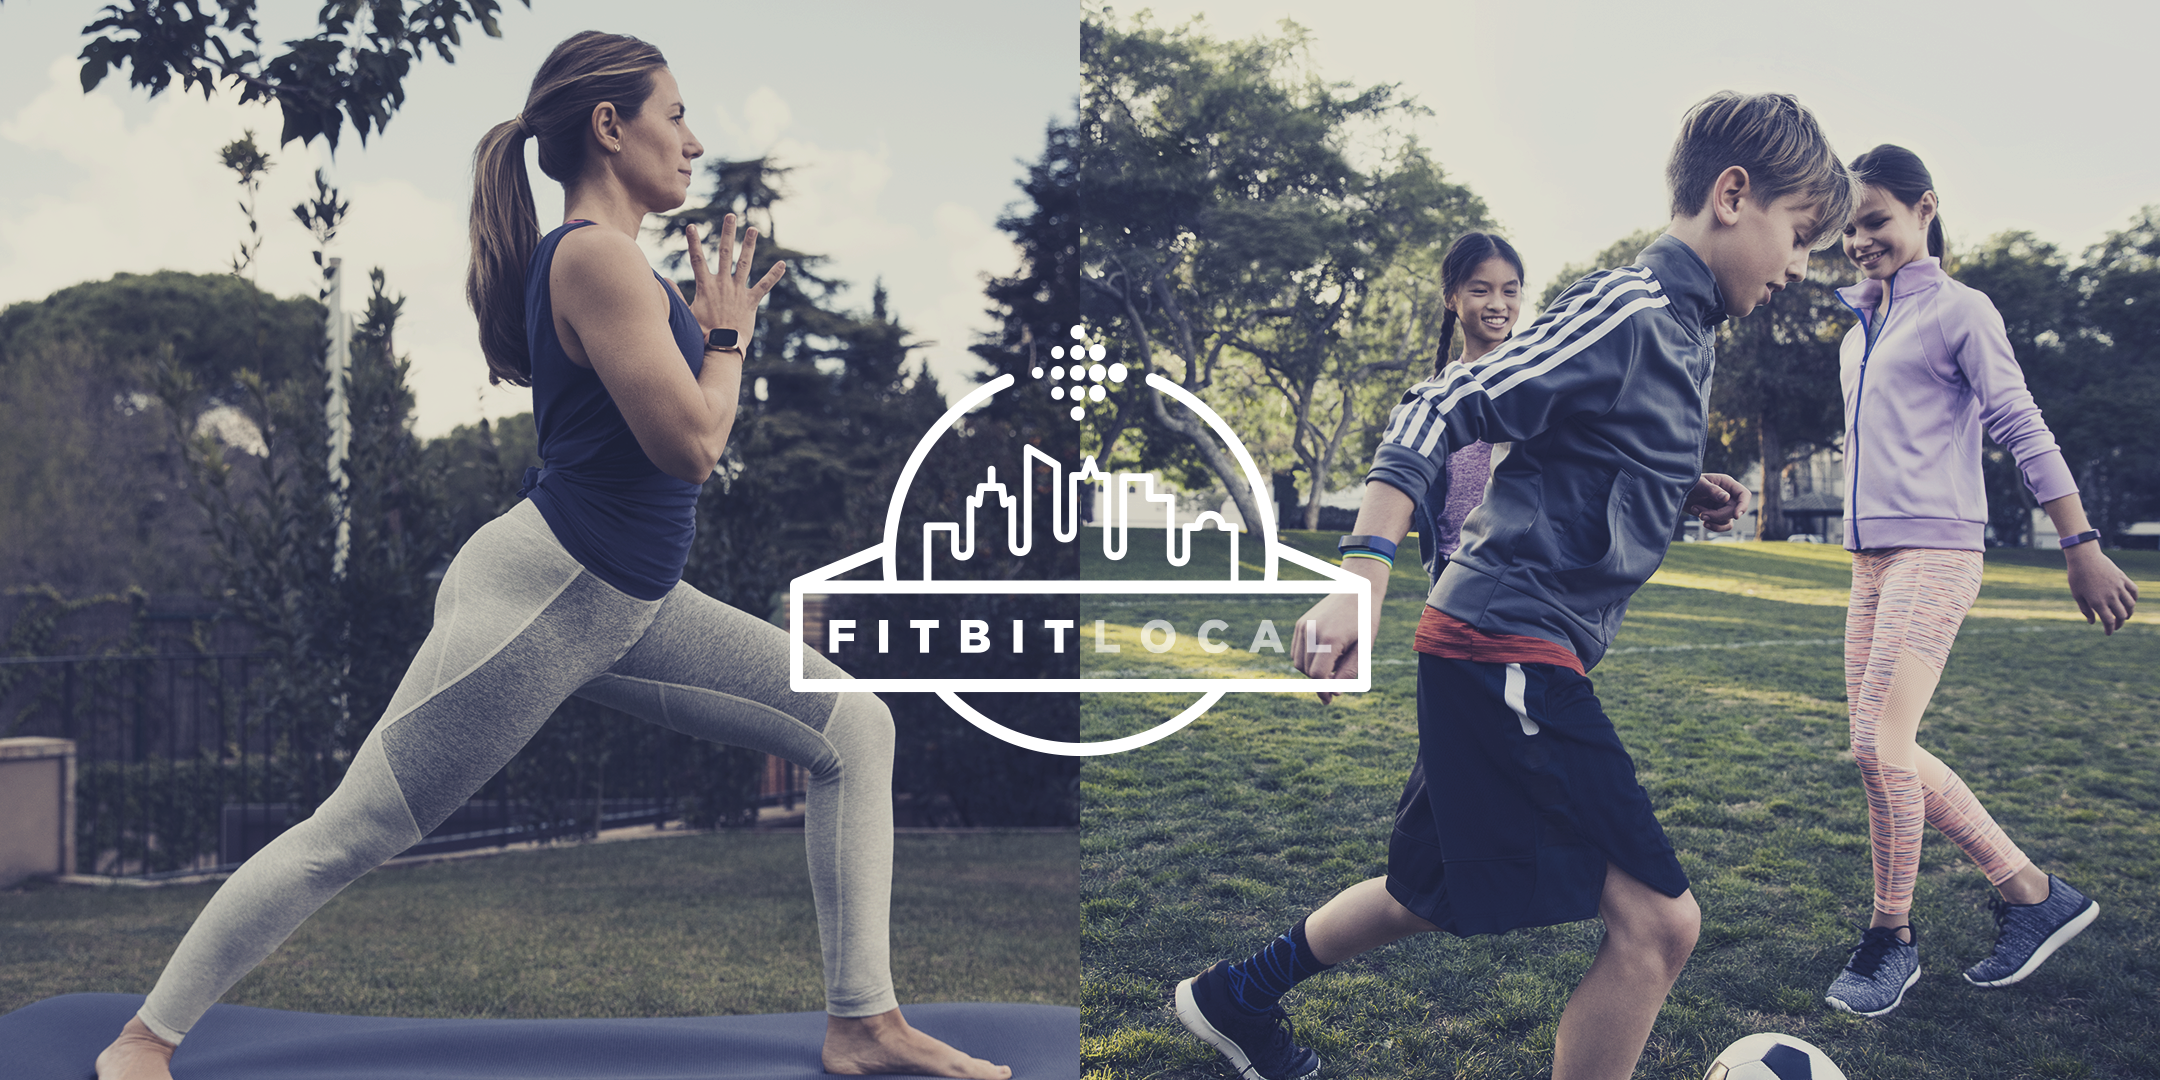 Fitbit Local Family Fit-Fest